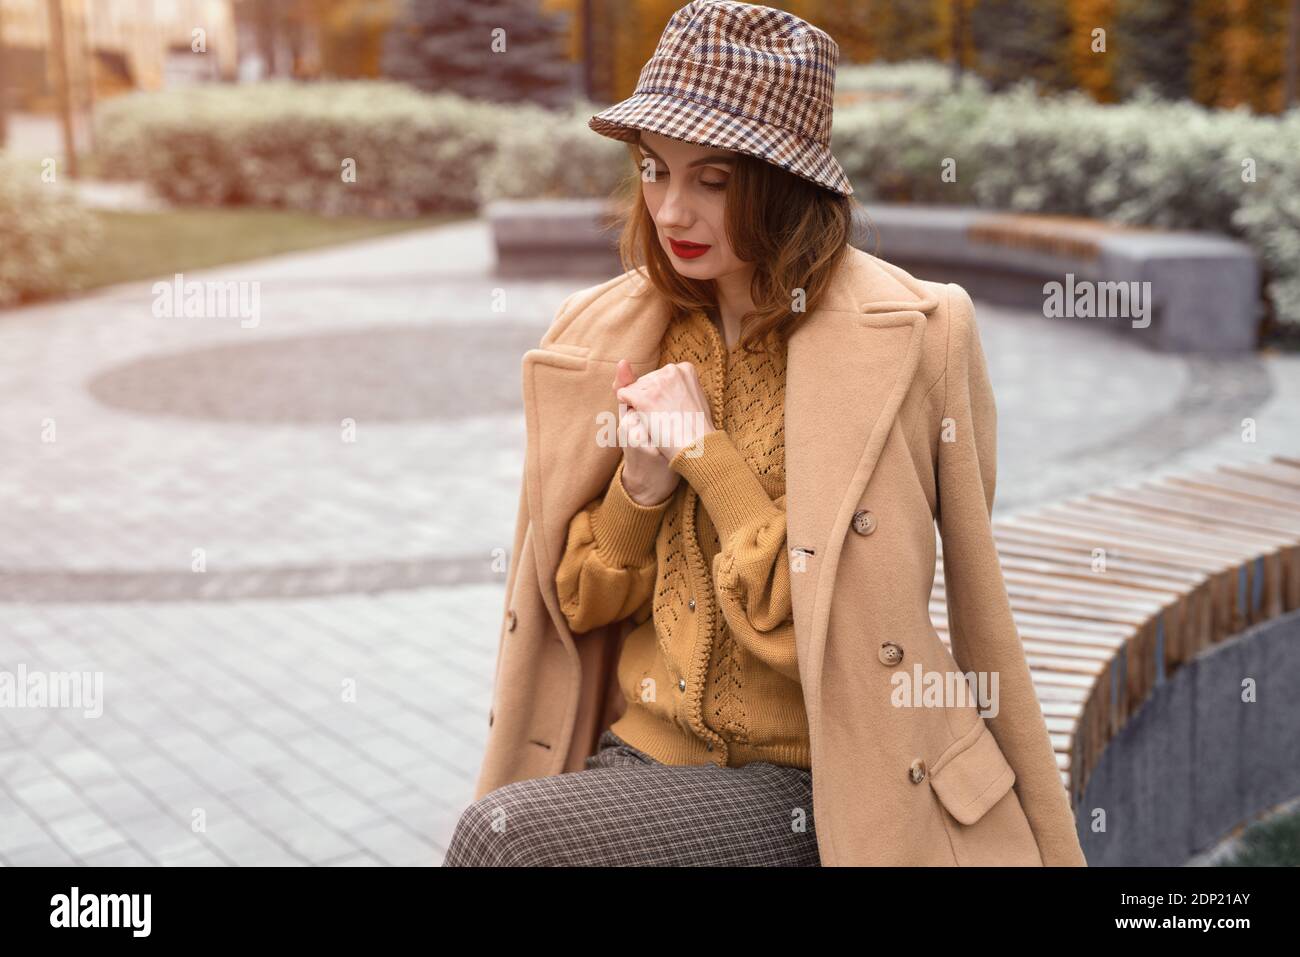 Parisian girl in beige coat and plaid panama hat siting on rounded bench waiting for her date or girlfriends. Autumn walk concept. Retro tinted photo Stock Photo